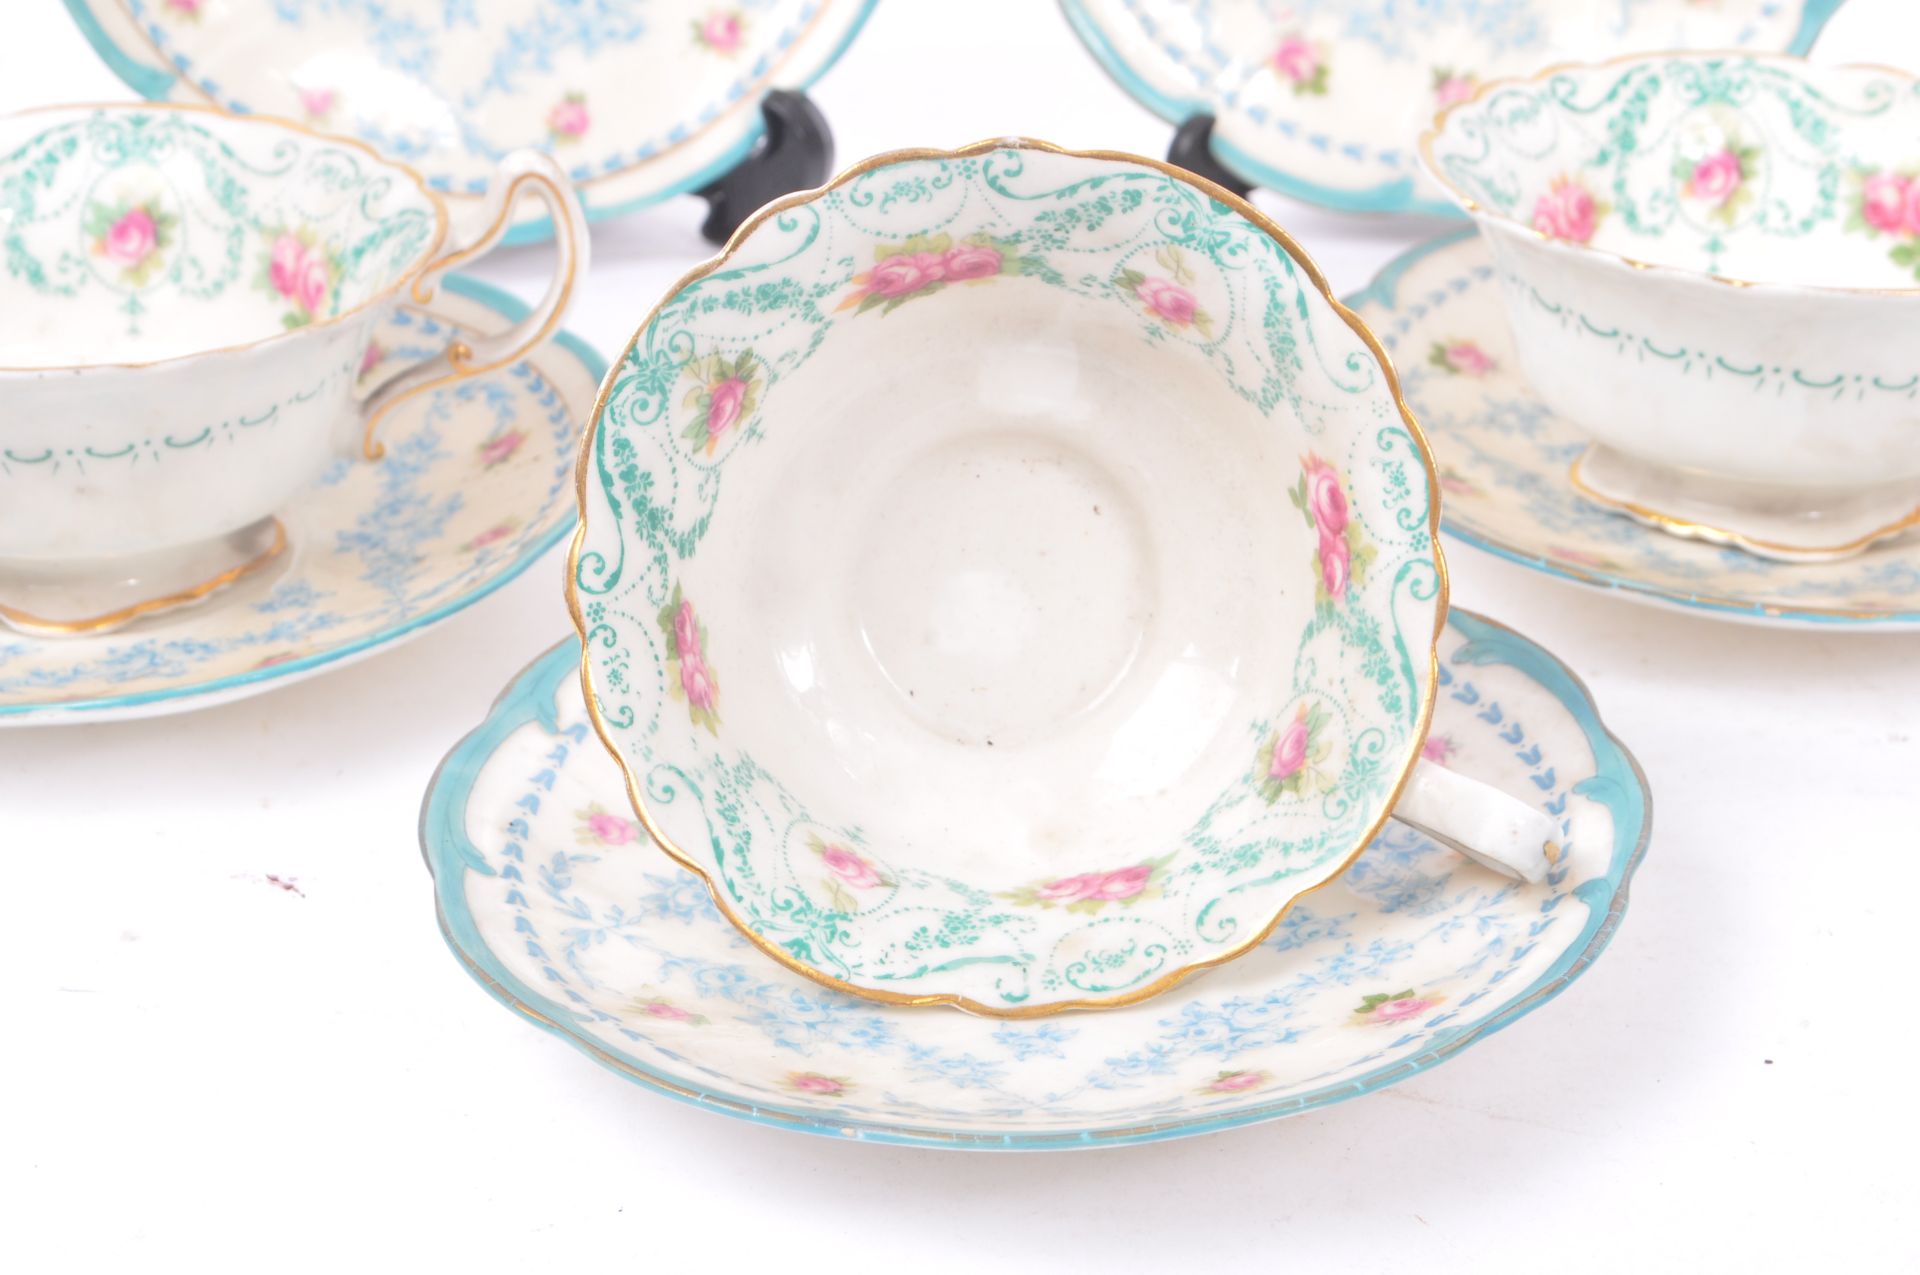 THREE EARLY 20TH CENTURY ROYAL DOULTON TEACUP & SAUCER - Image 4 of 5